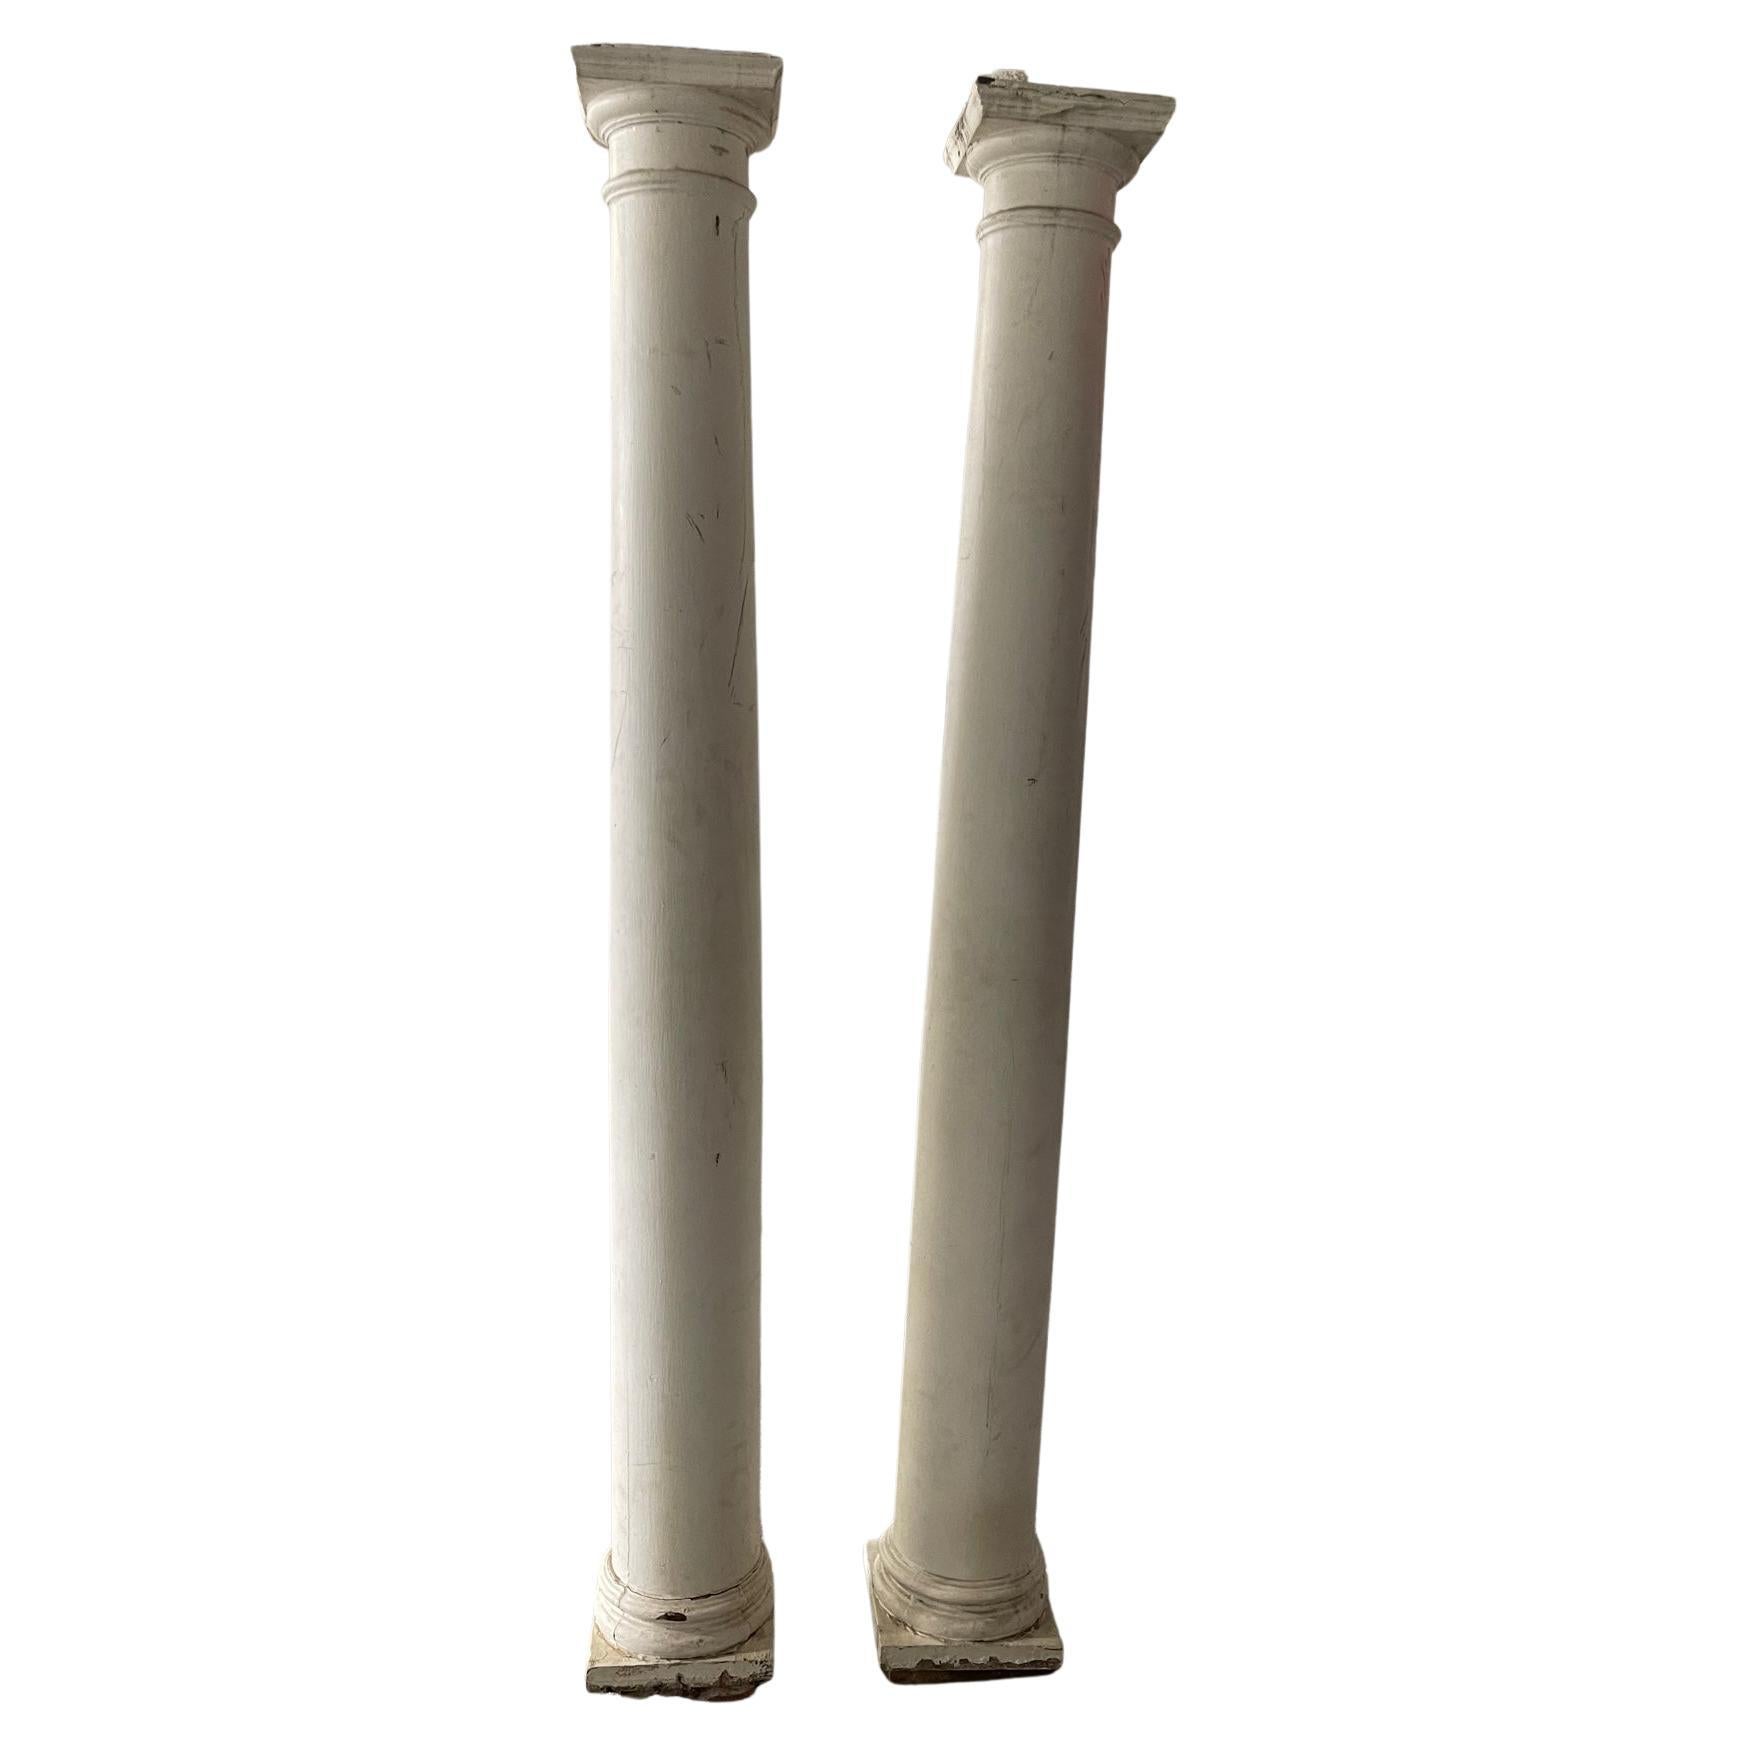 Pair of Painted Wood Full-Length Columns with Capitals and Bases, 19th Century For Sale